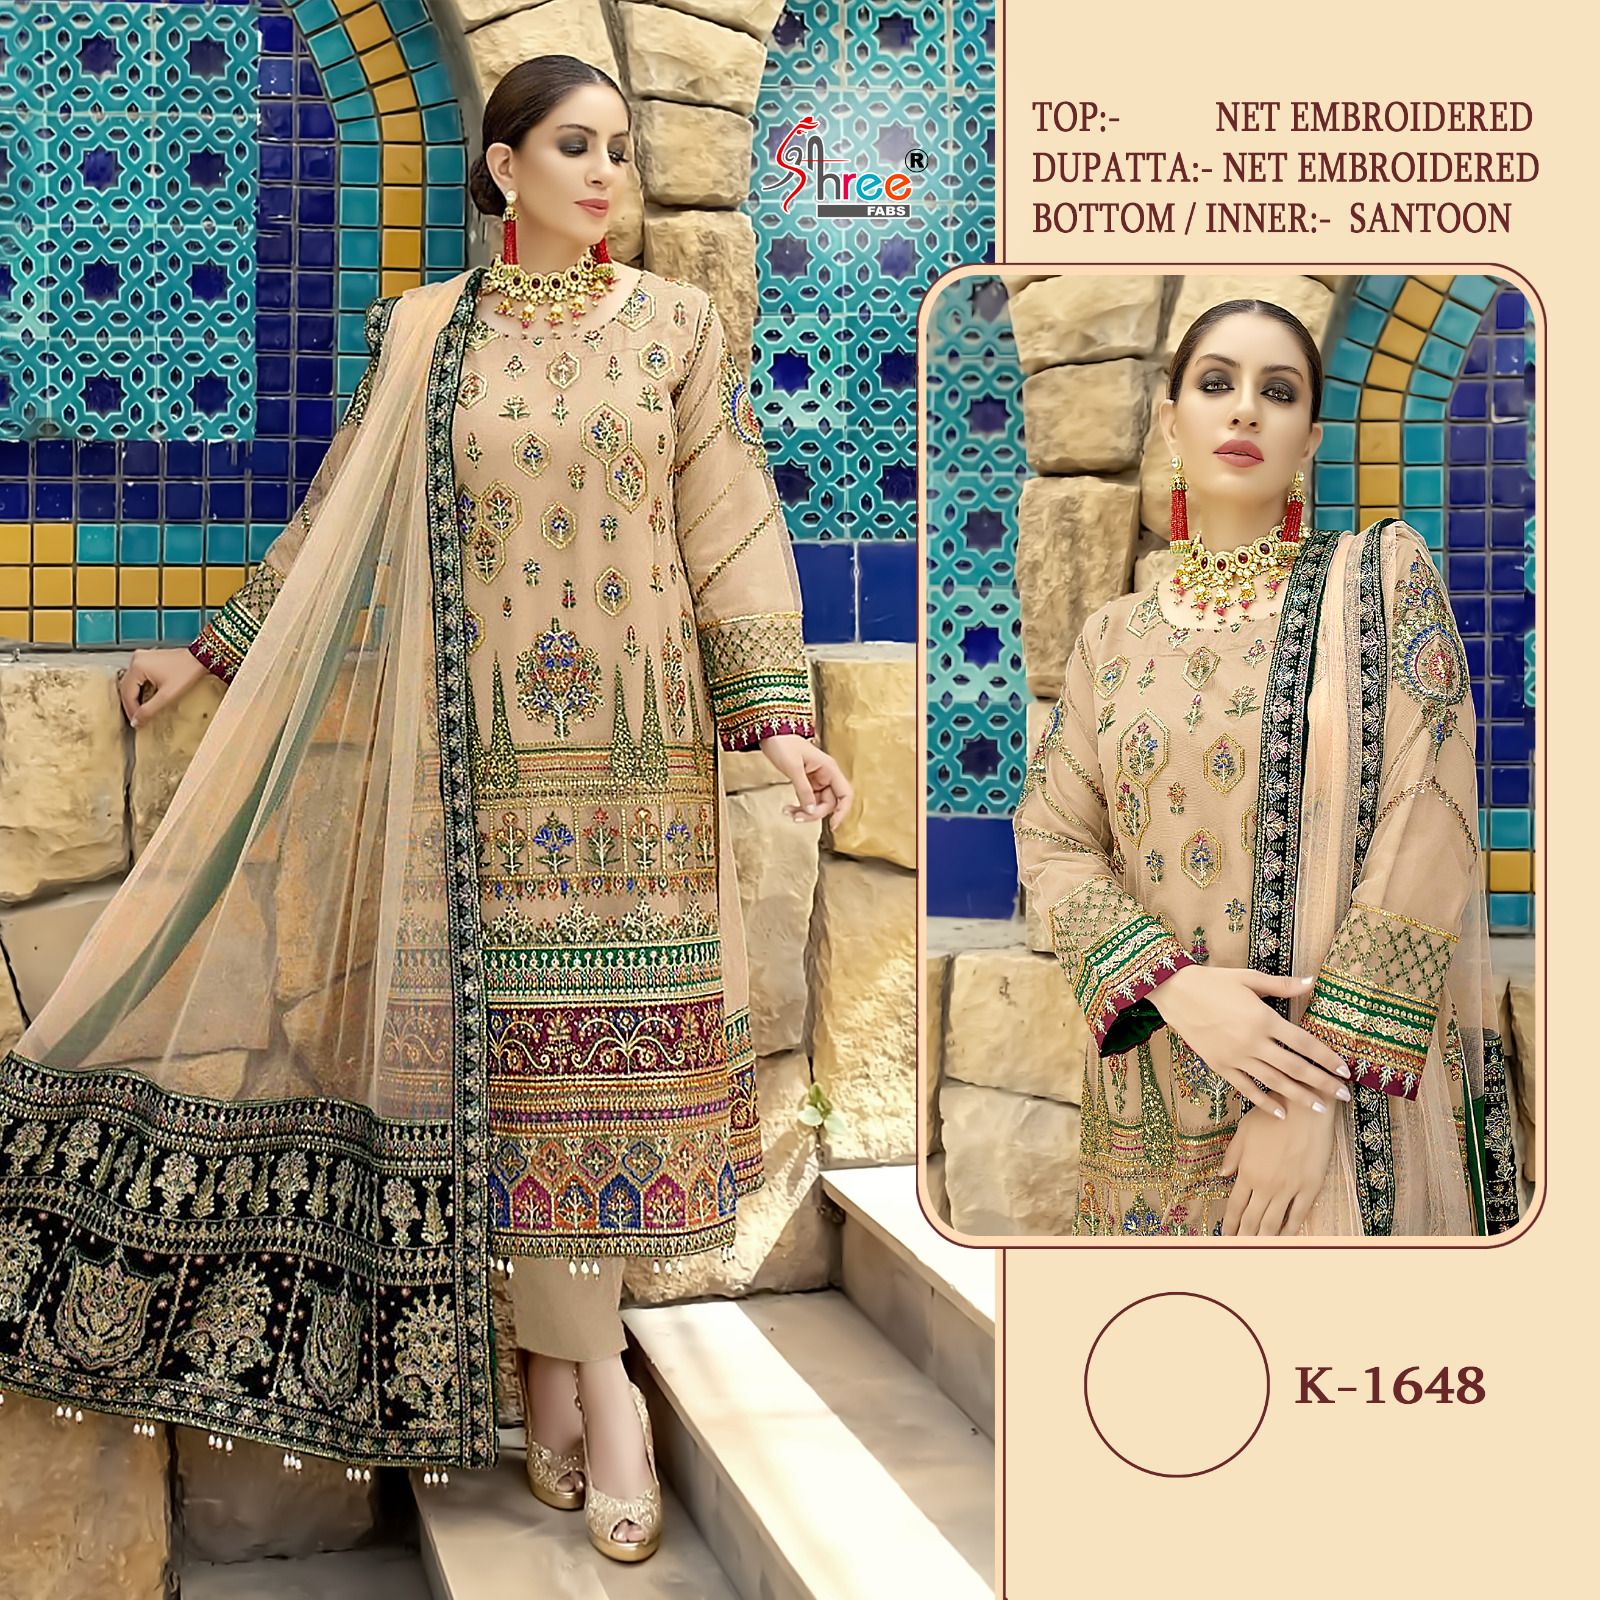 SHREE FABS 811 SERIES PAKISTANI EMBROIDERY SUITS